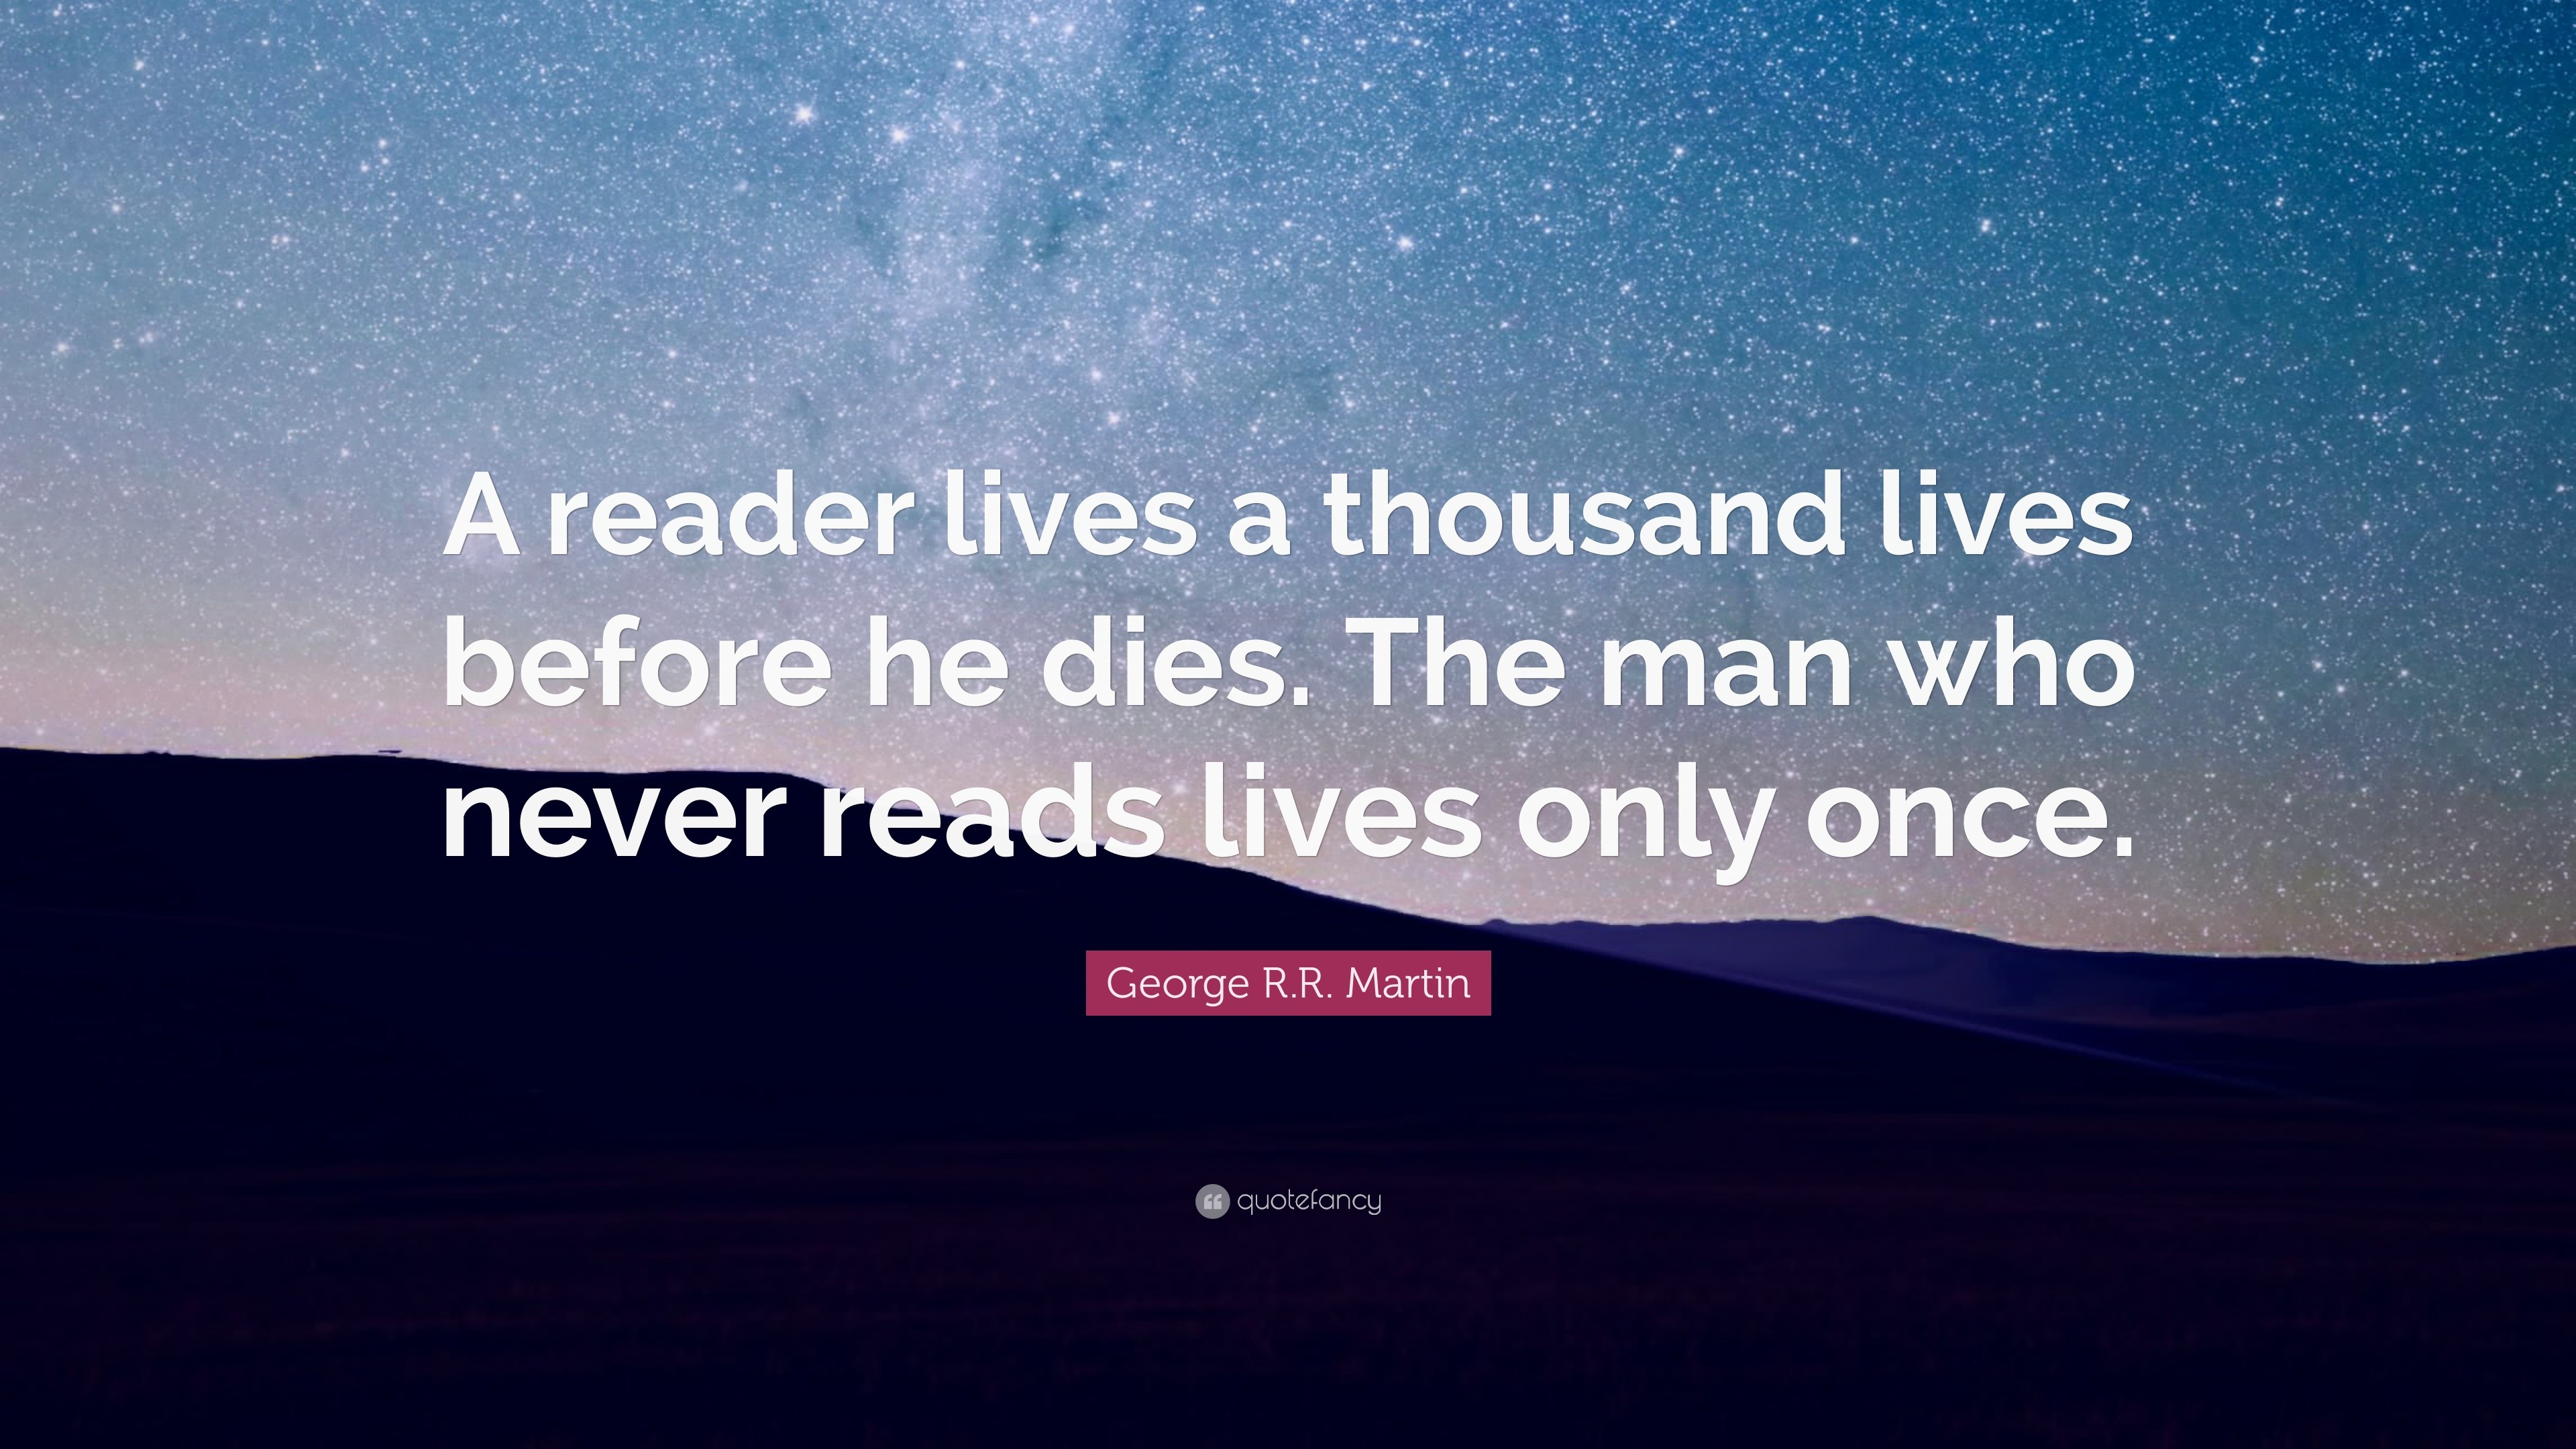 George R.R. Martin Quote: “A reader lives a thousand lives before he ...